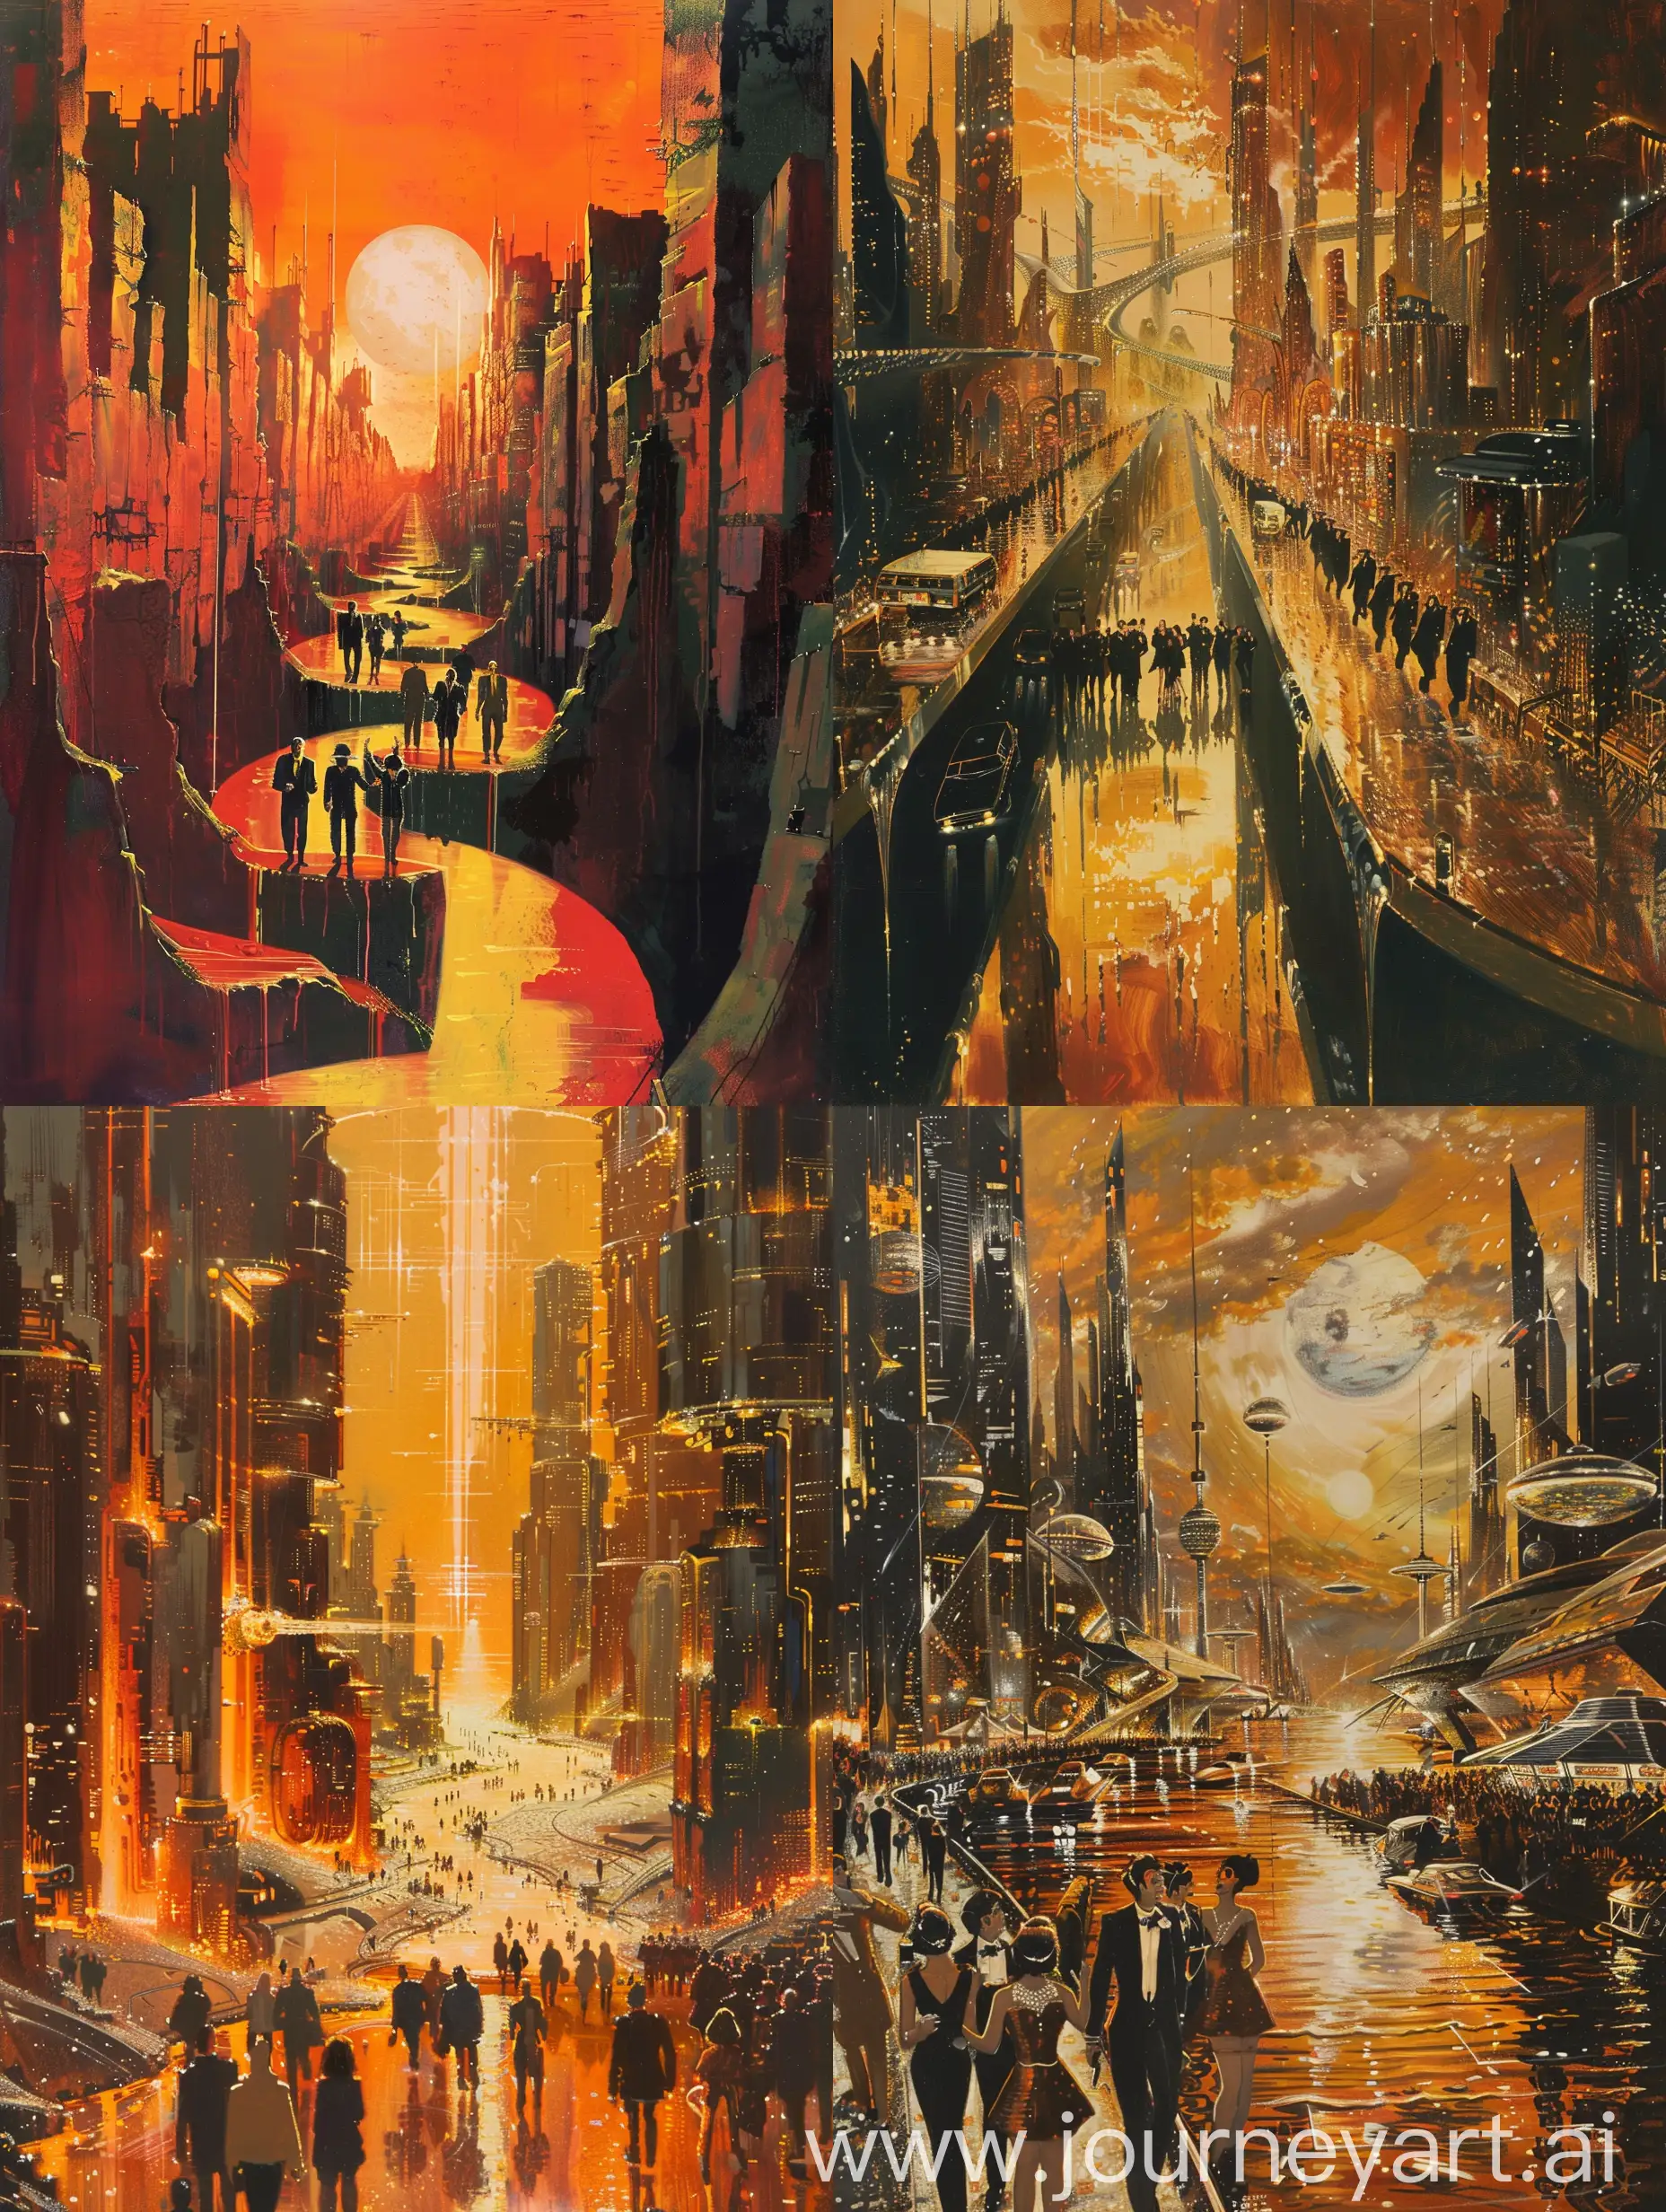 1970s sci fi painting, a metropolis with canals of liquid metal, golden hour, celebrities arriving at a party